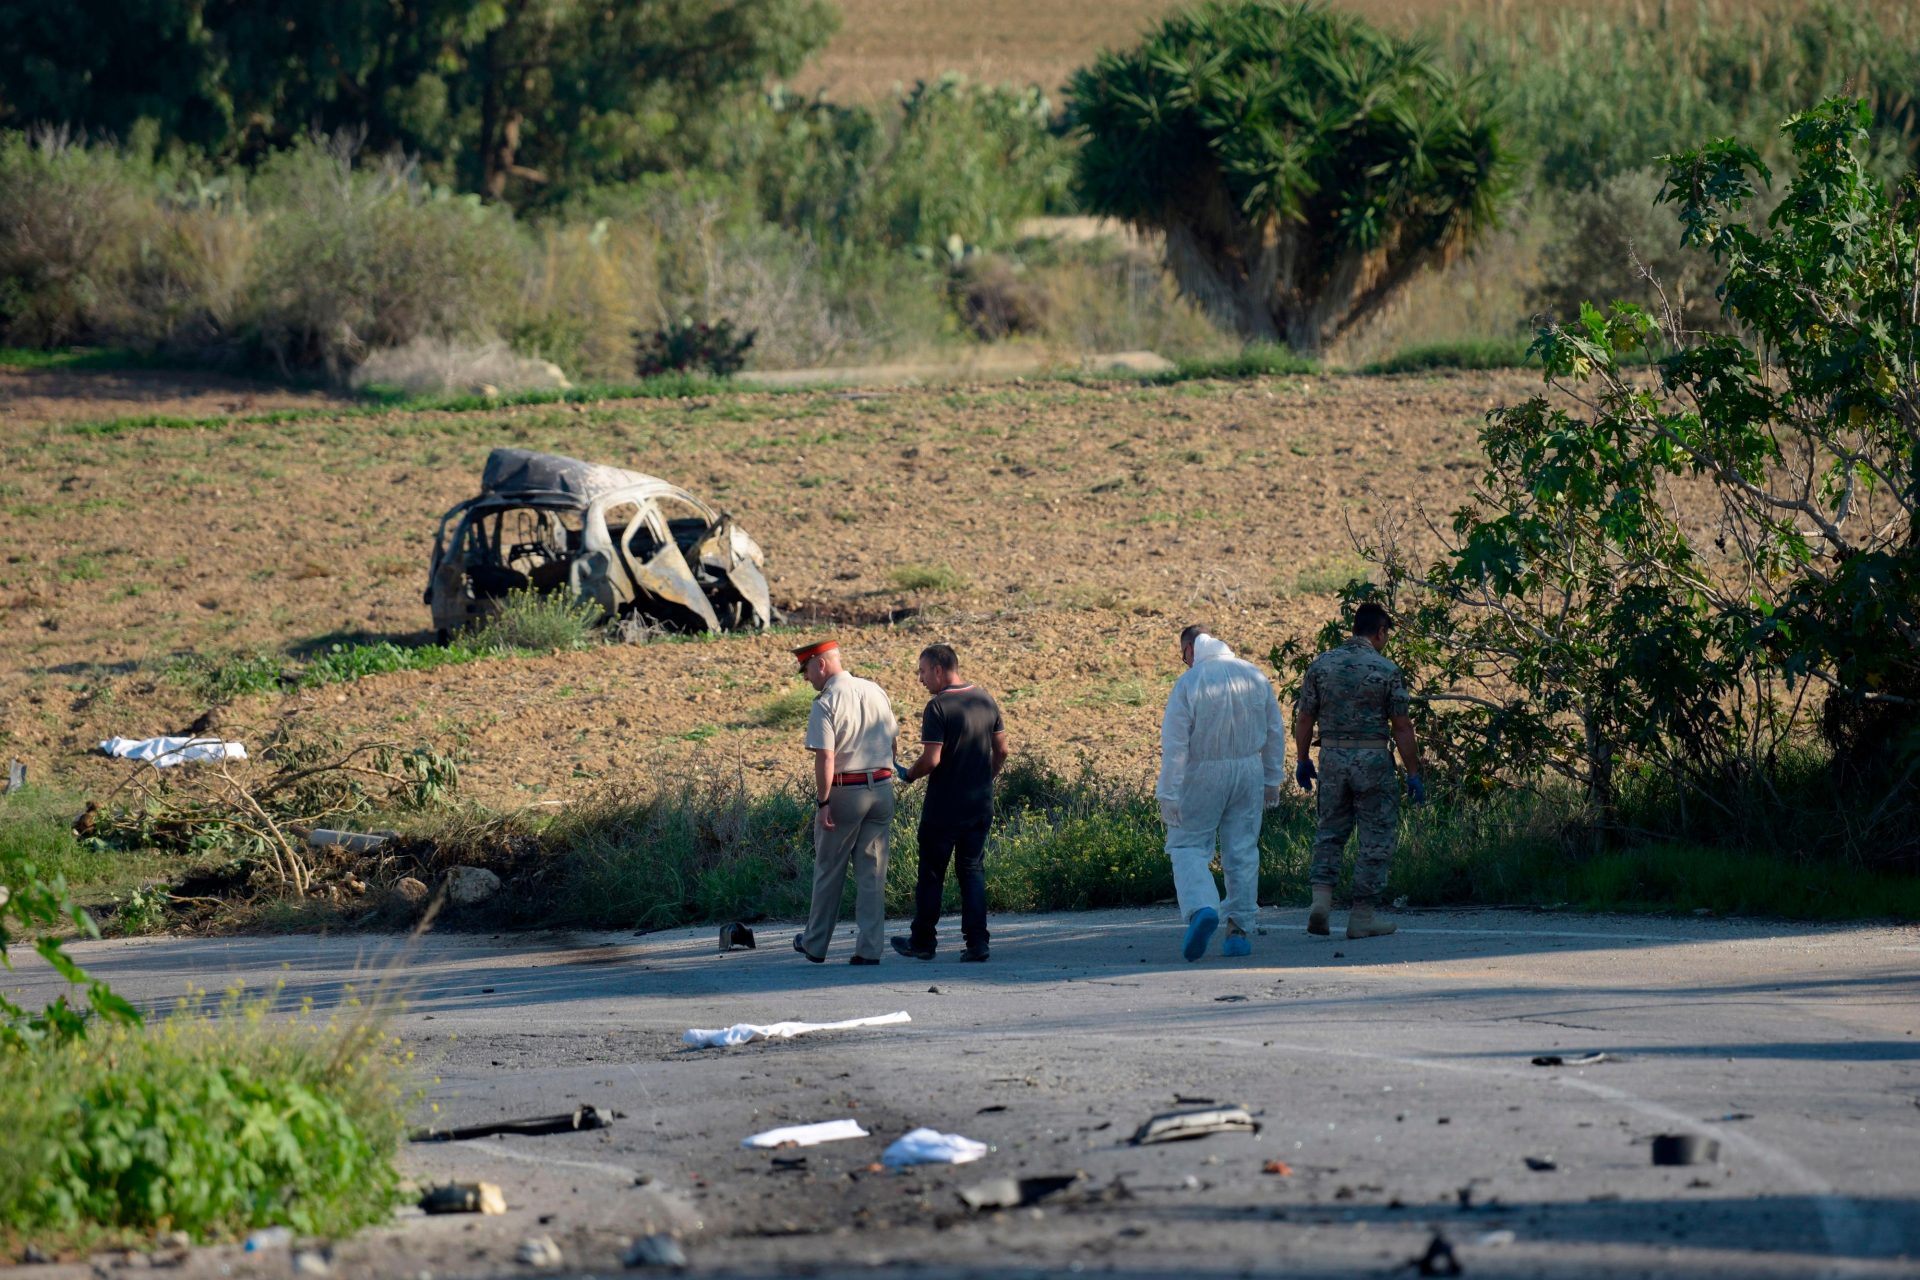 Police and forensic experts inspect the wreckage of a car bomb which killed journalist Daphne Caruana Galizia in Malta, in 2017. One man has been jailed for her murder, which has been linked to a wider conspiracy involving senior Maltese establishment figures. Photo: STR/AFP via Getty Images